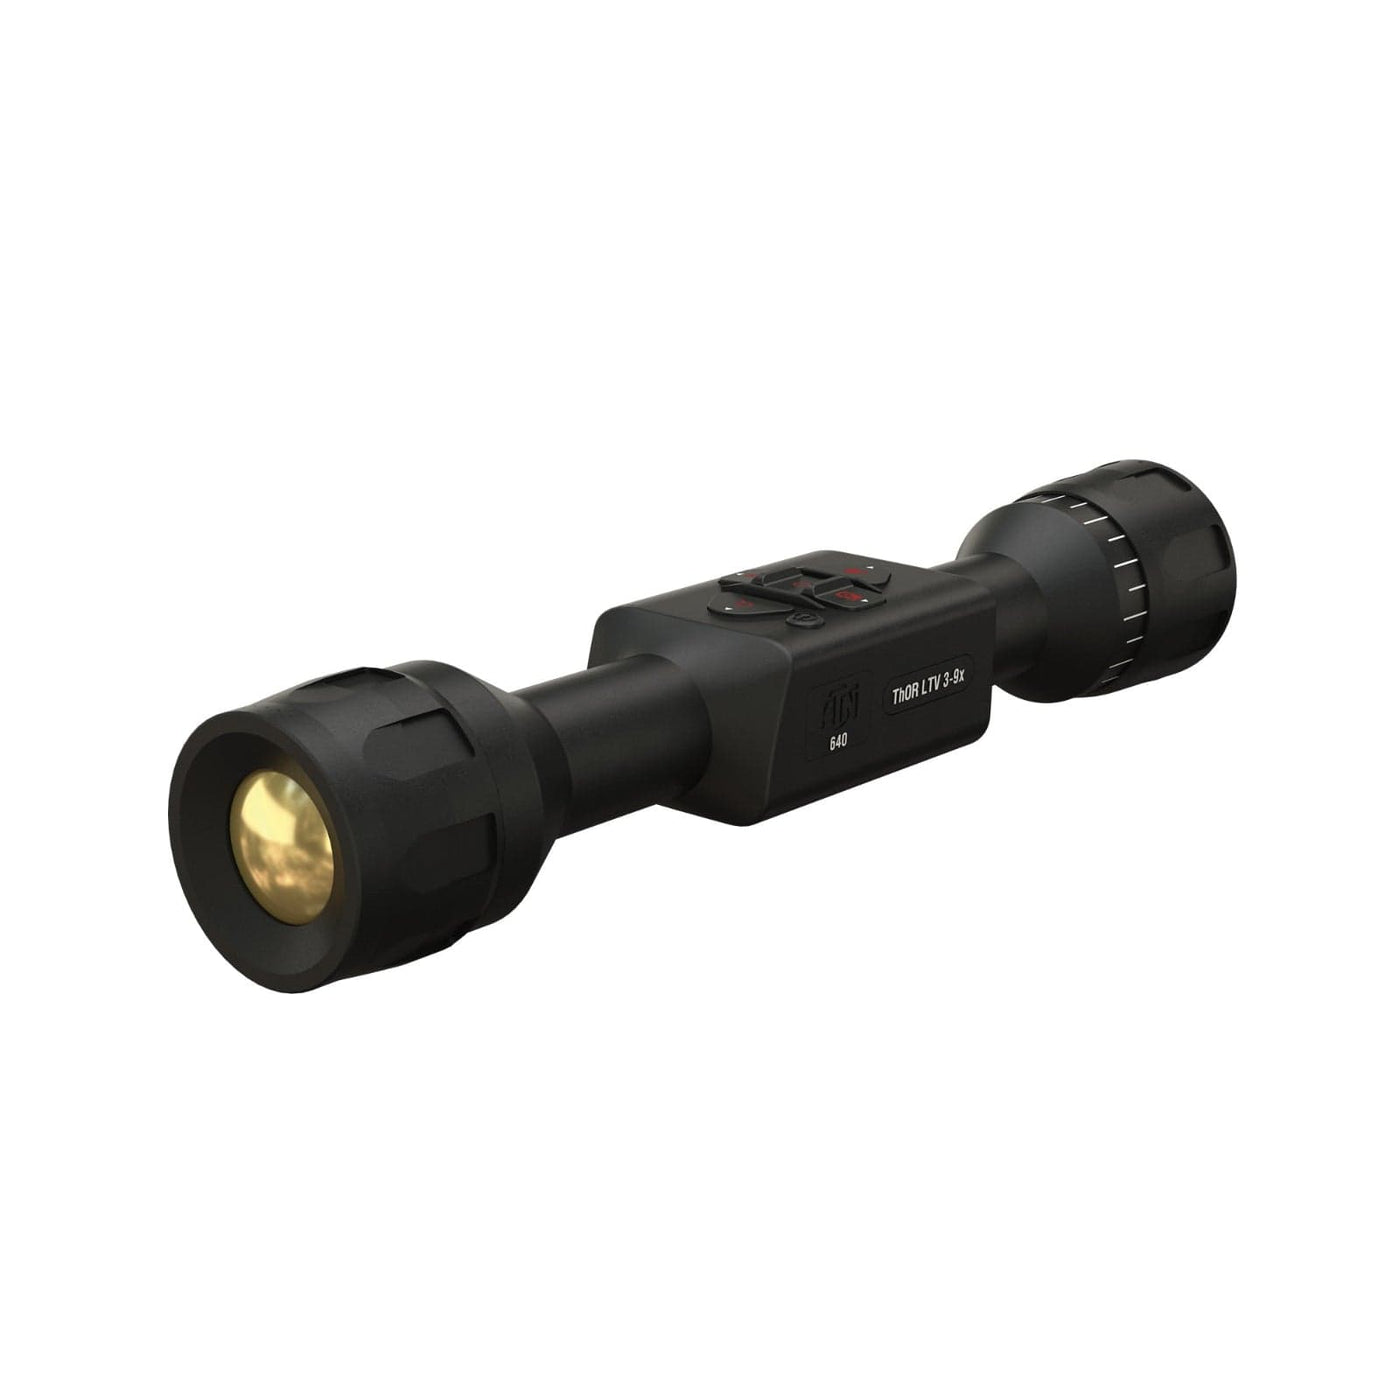 ATN ATN Thor LTV 3-9x 640x480 12 mic Thermal Rifle Scope w Video Nightvision And Thermal